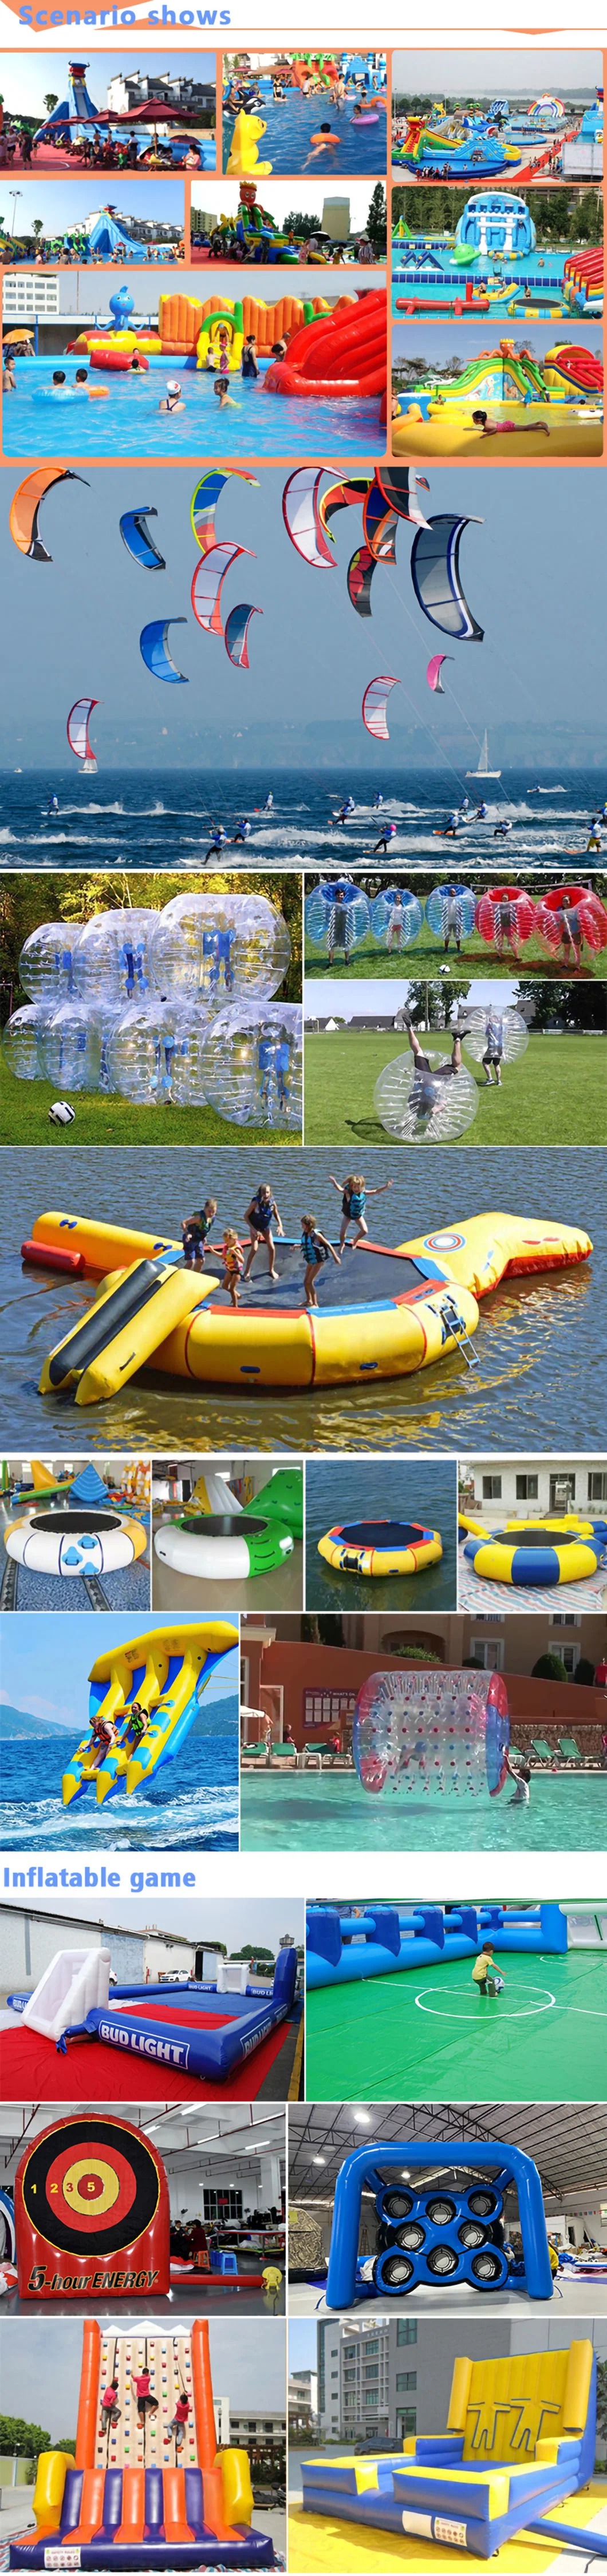 Zhengrong 10FT X 3FT Inflatable Gymnastics Mat Air Track for Water Play Cheerleading